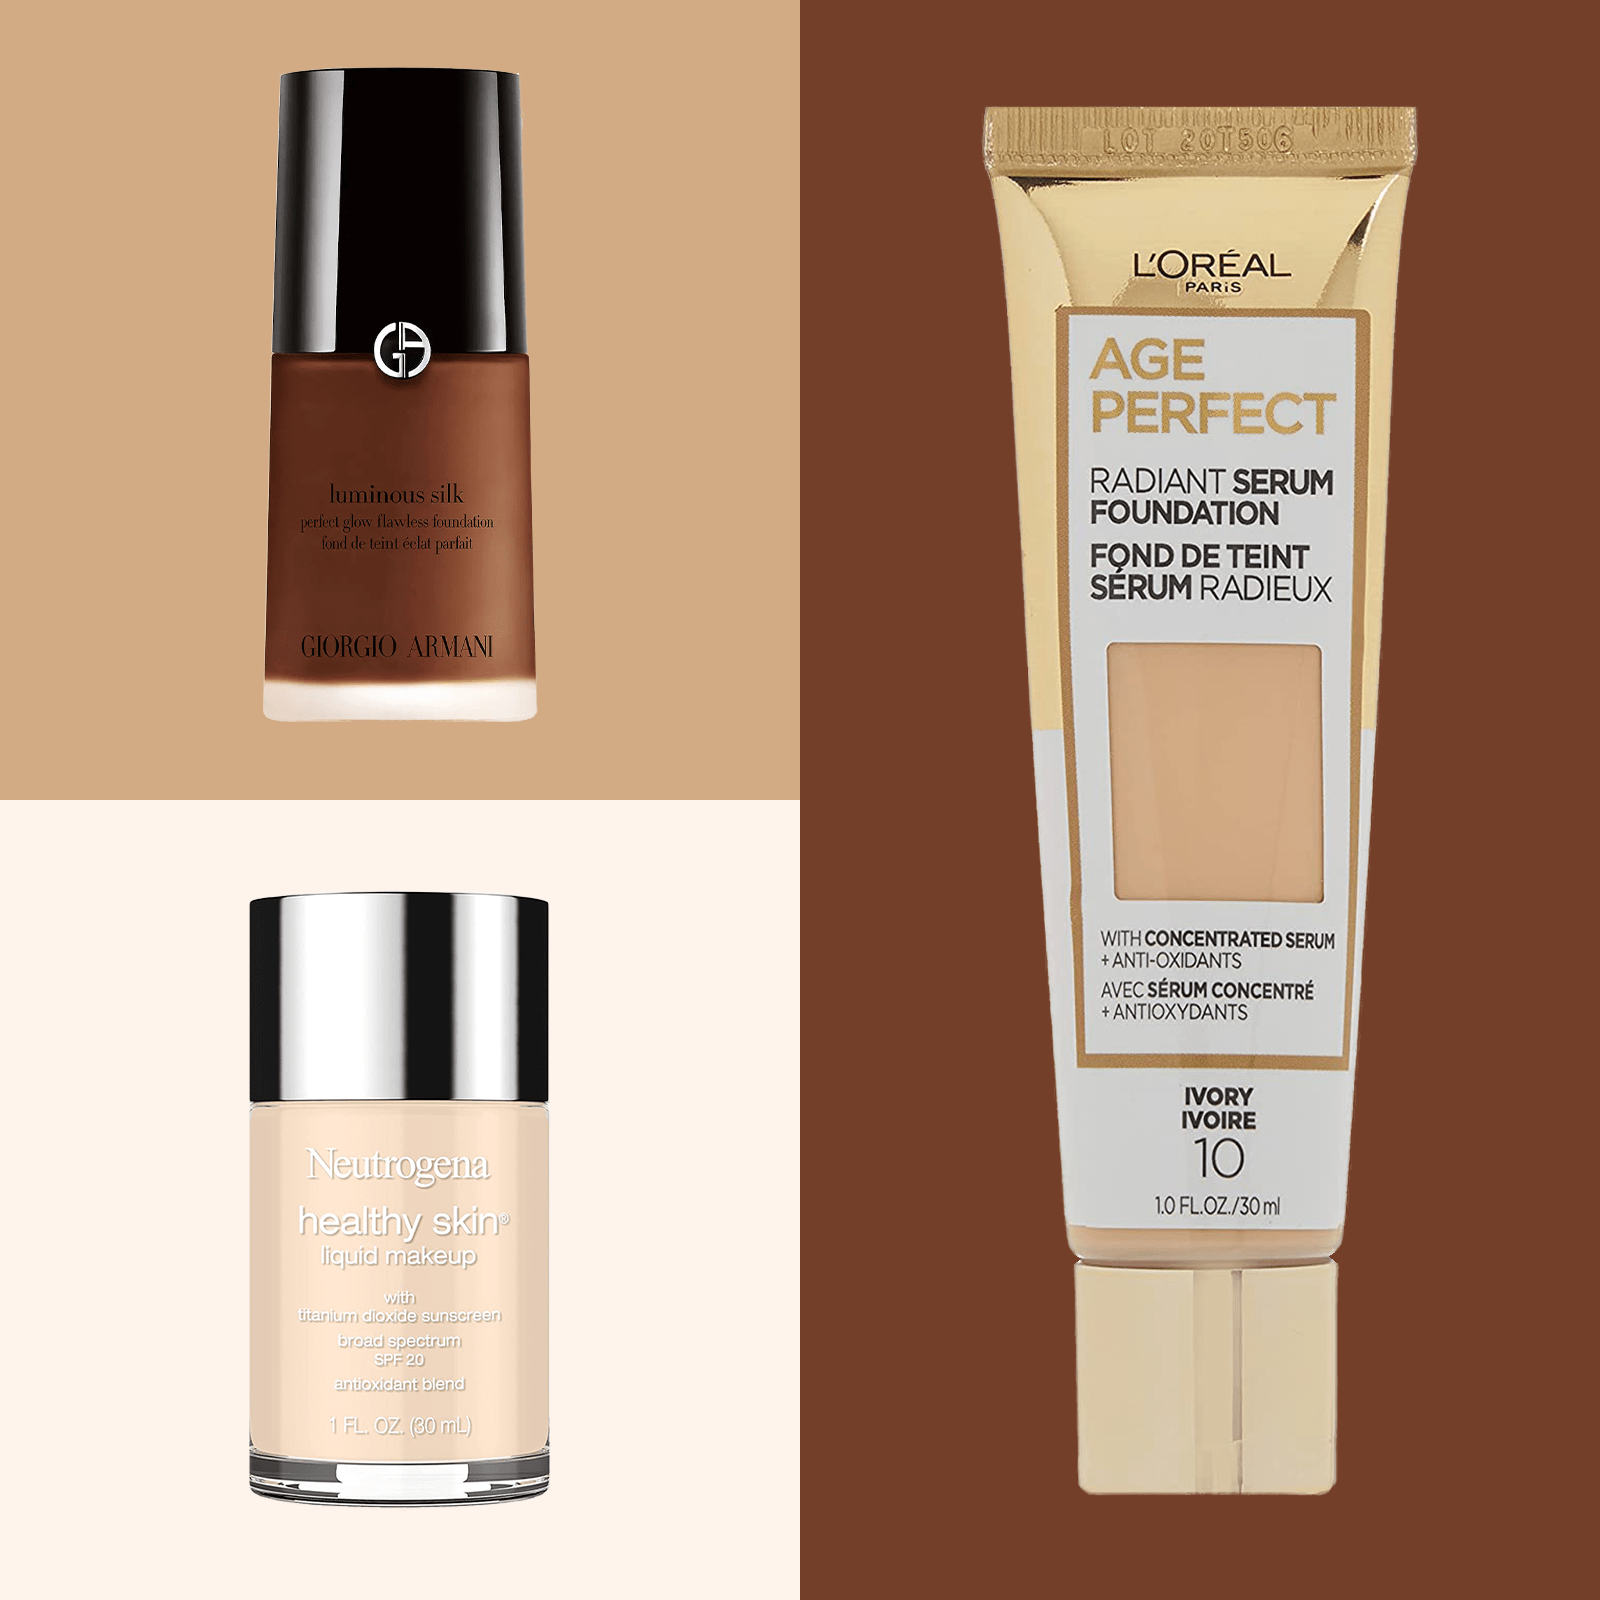 SELF Healthy Beauty Awards: The 11 Best Foundations, Concealers